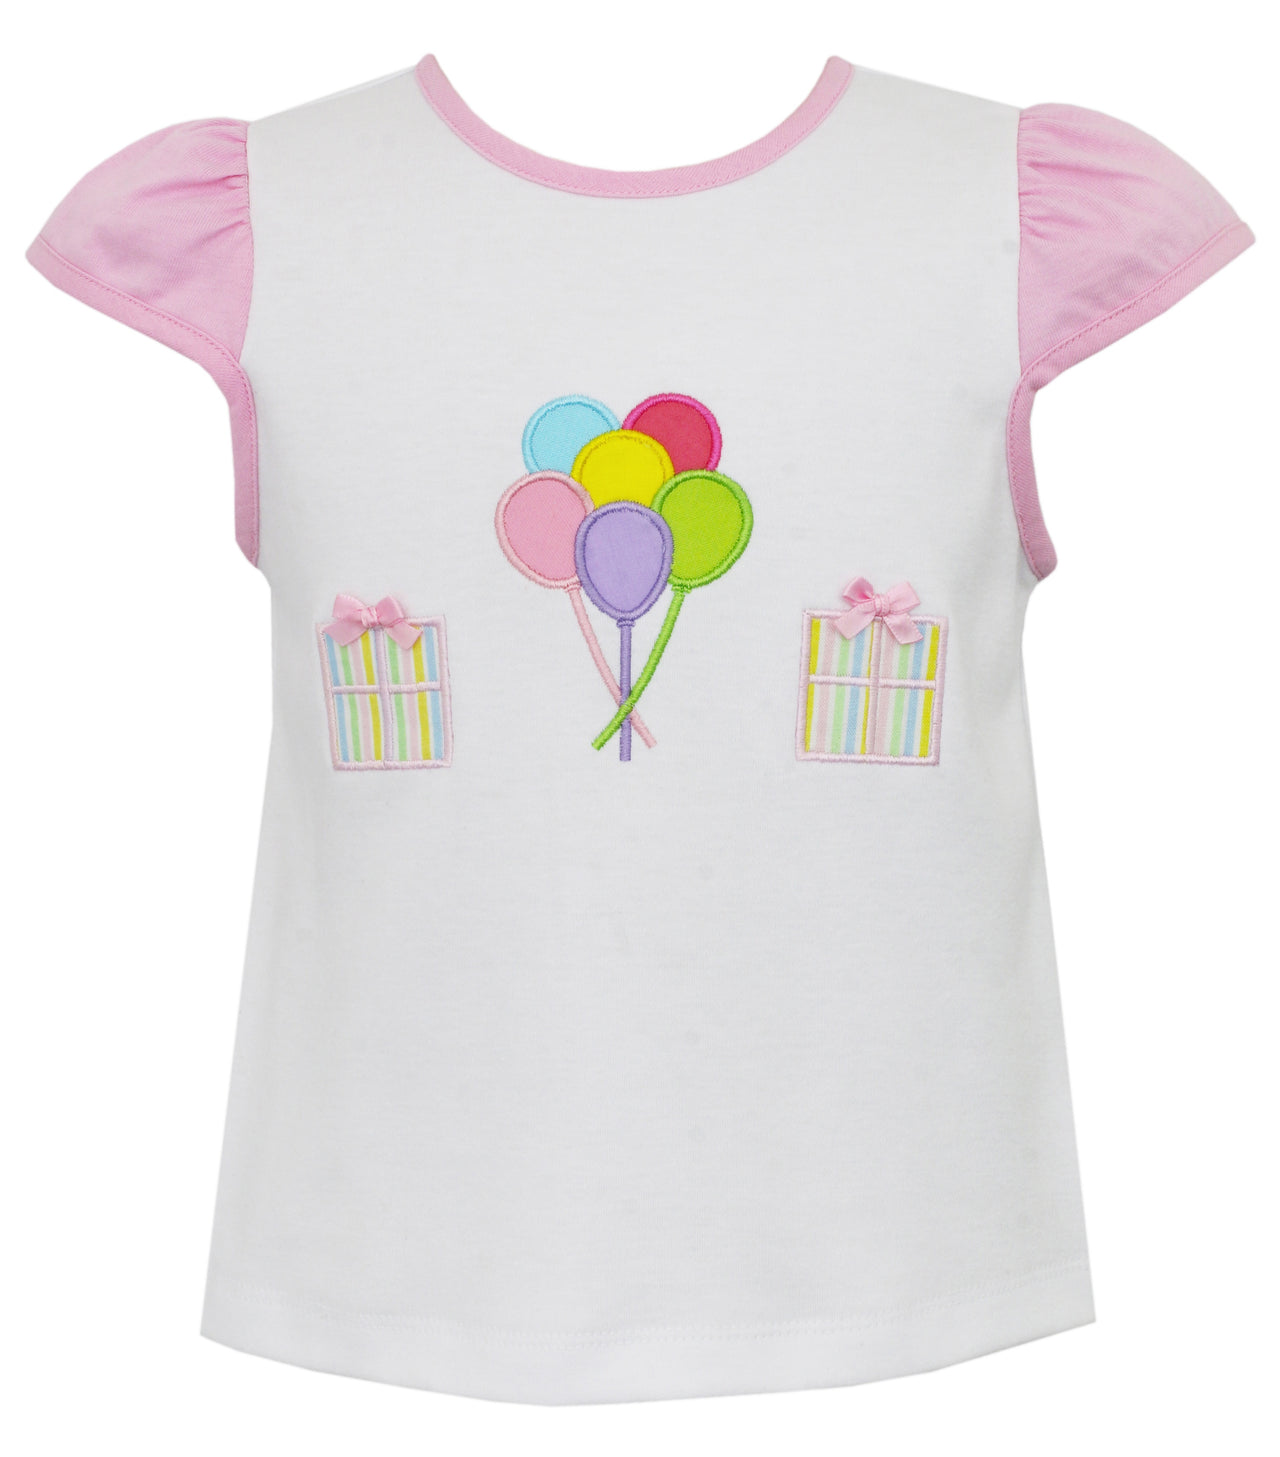 Claire & Charlie Birthday Girl's Shirt and Pink Shorts 5009SG/Q